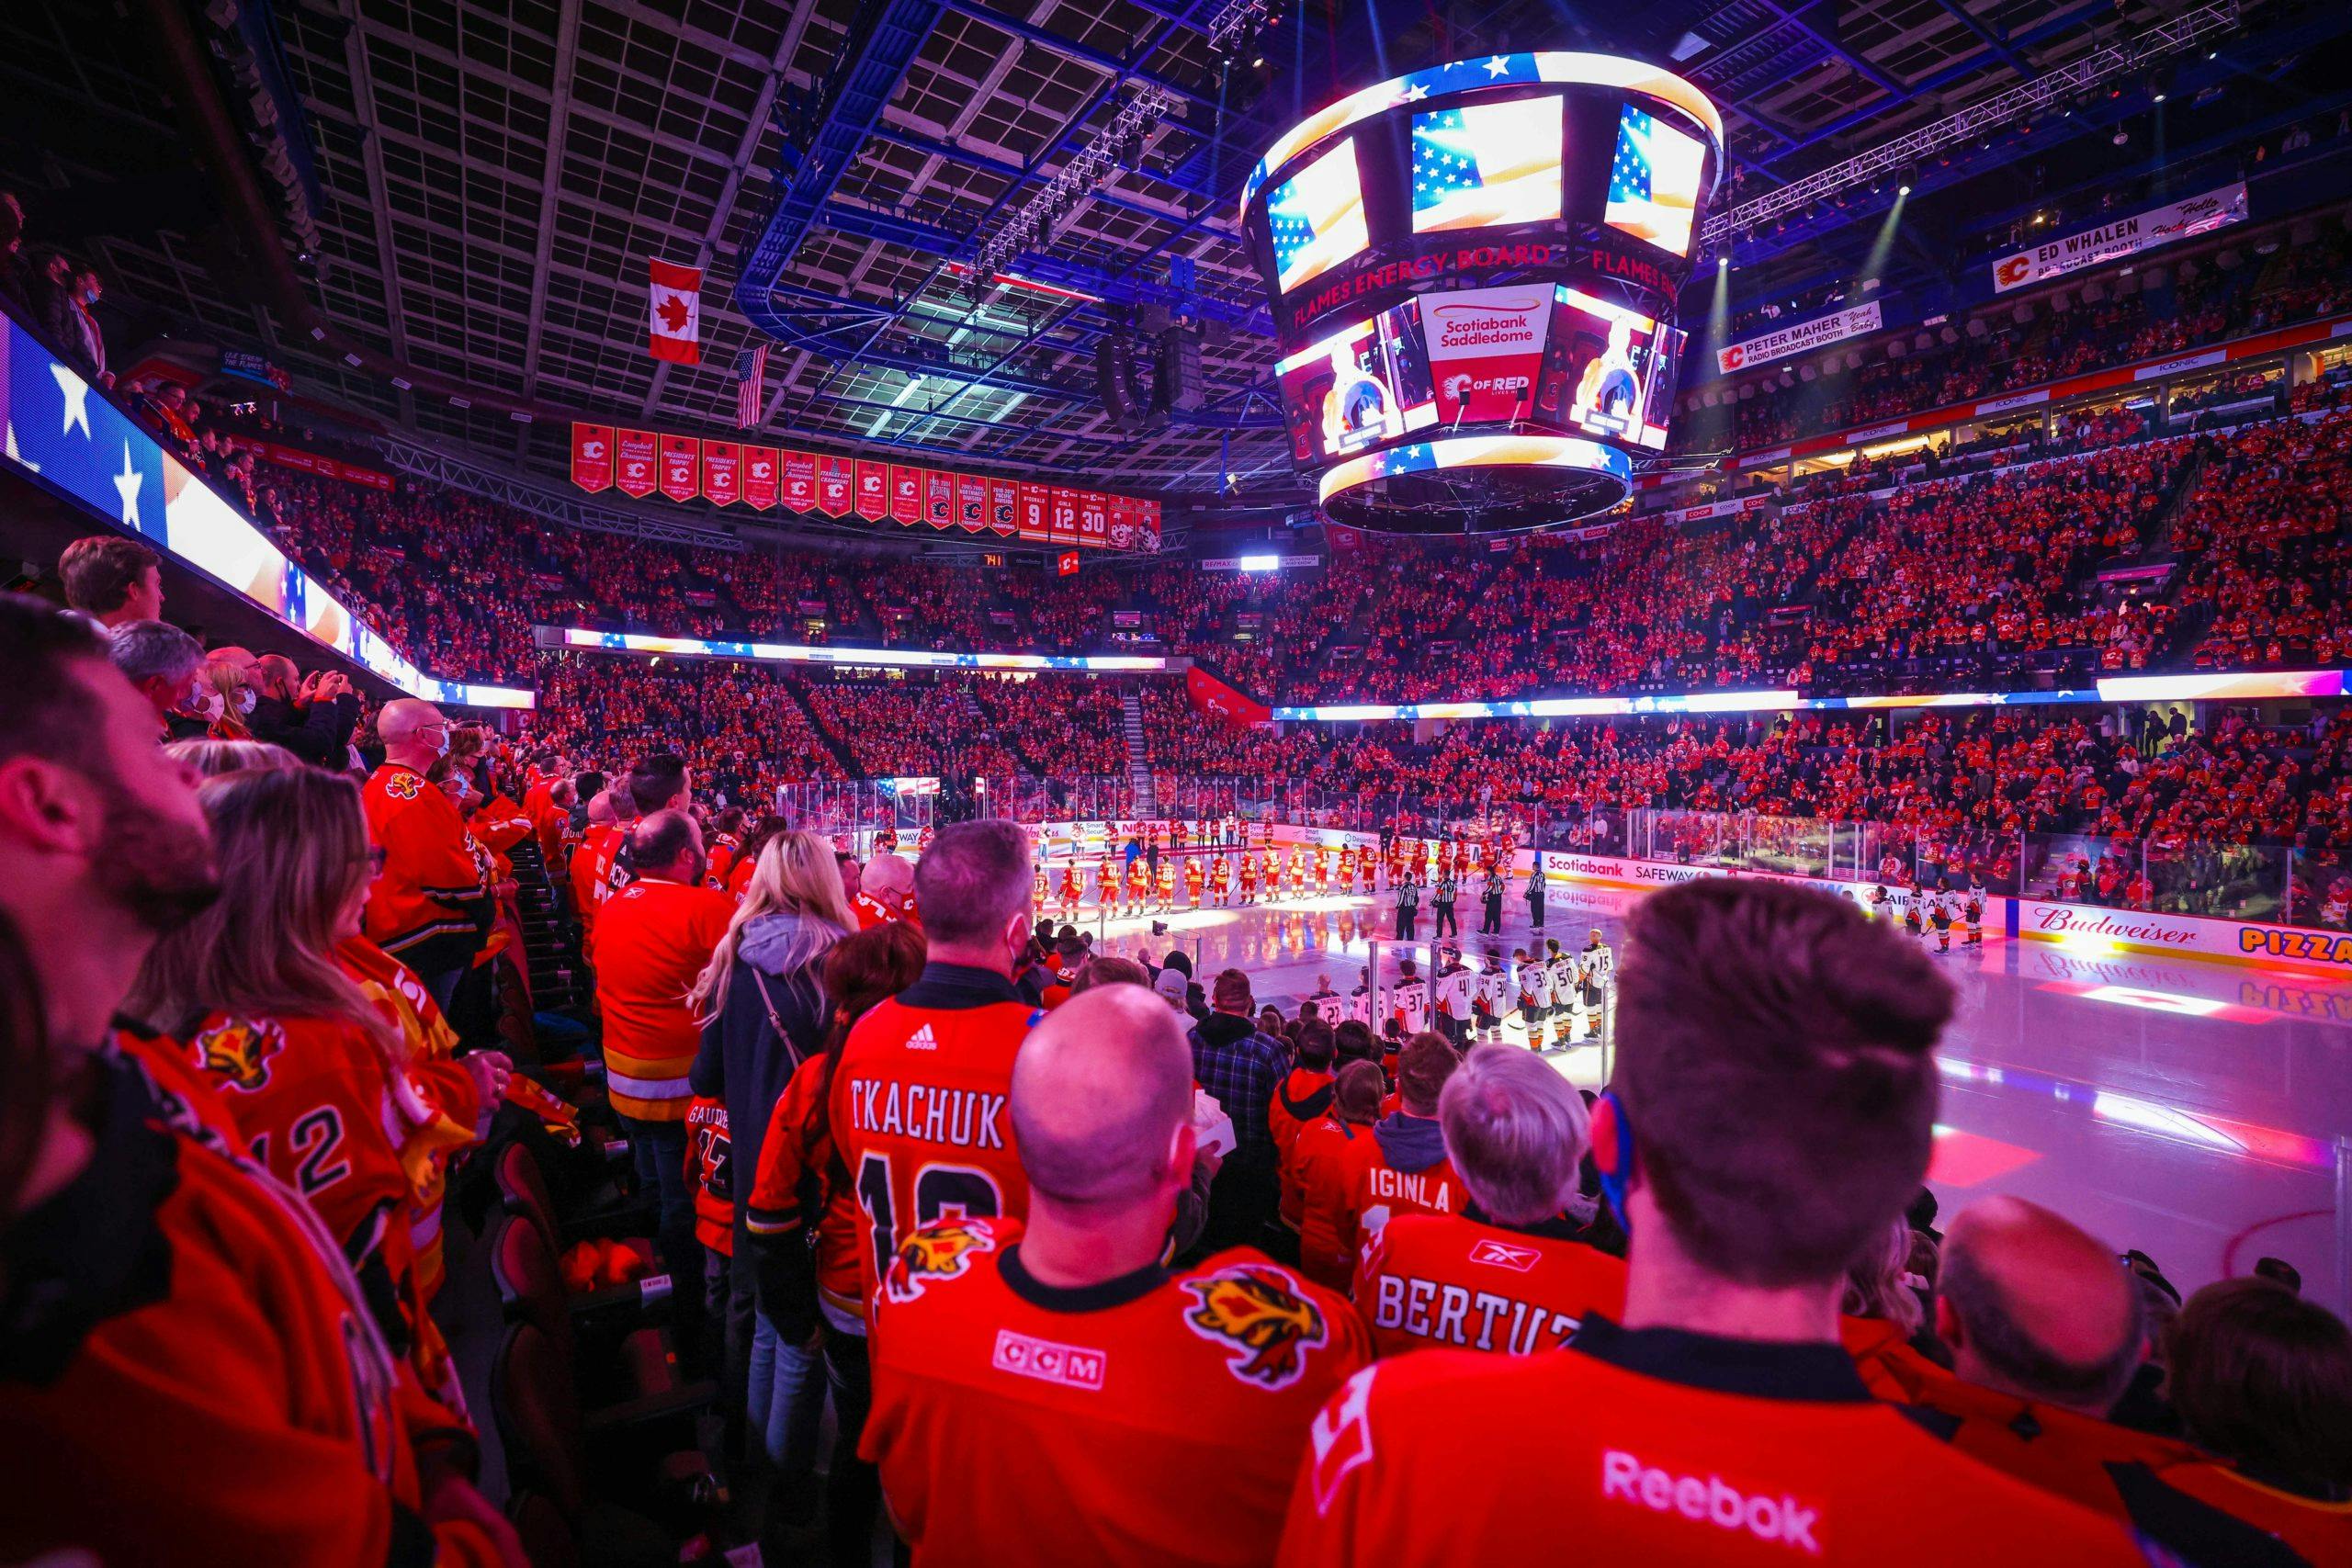 Miikka Kiprusoff will have his jersey up in the rafters on March 2